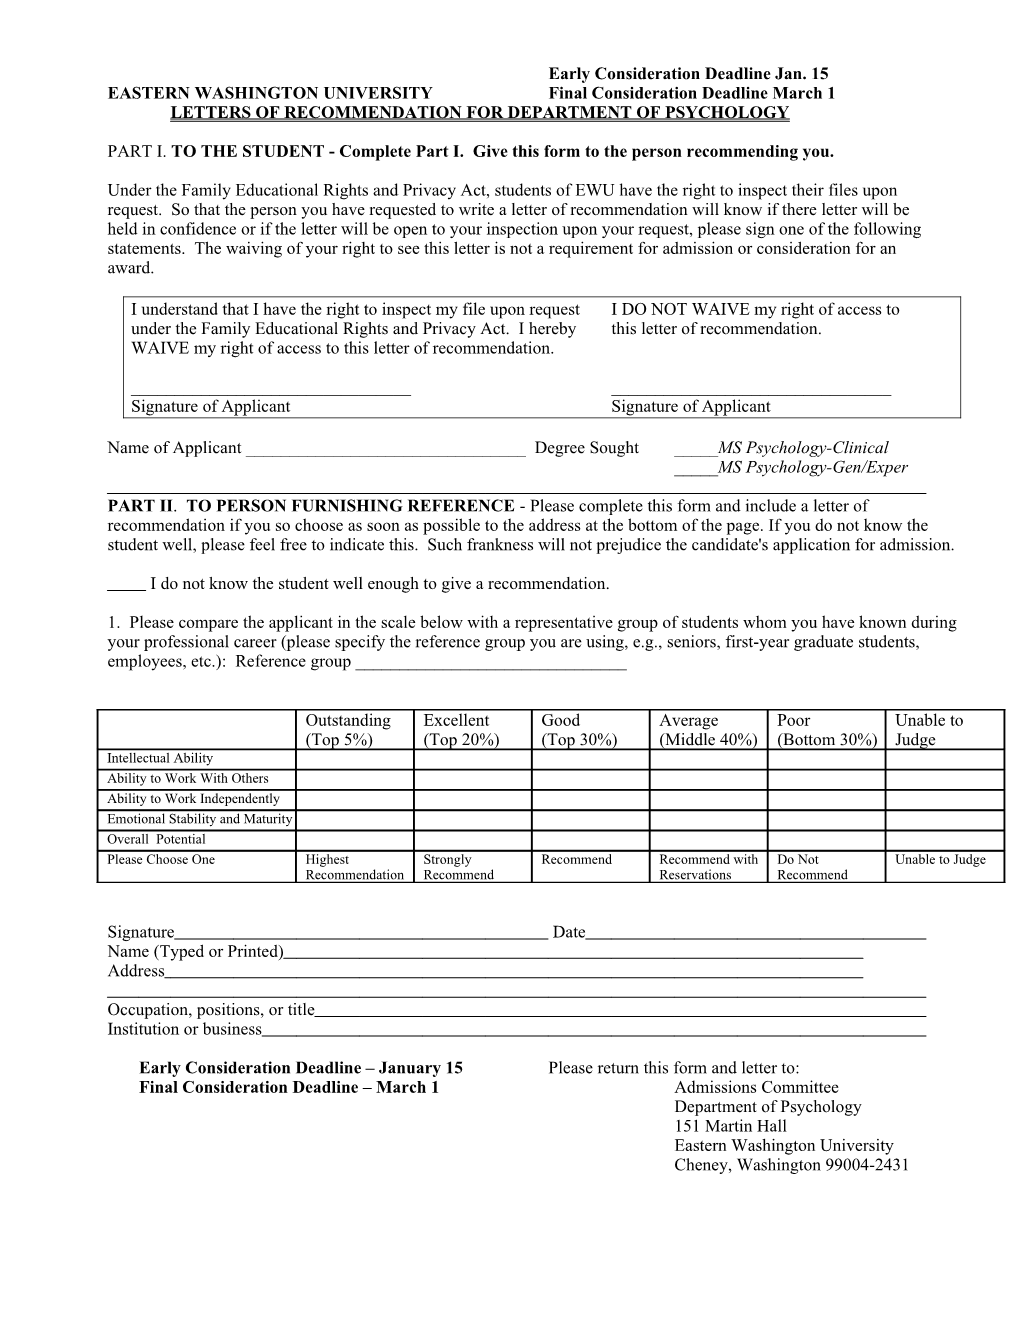 Letters of Recommendation Form s1